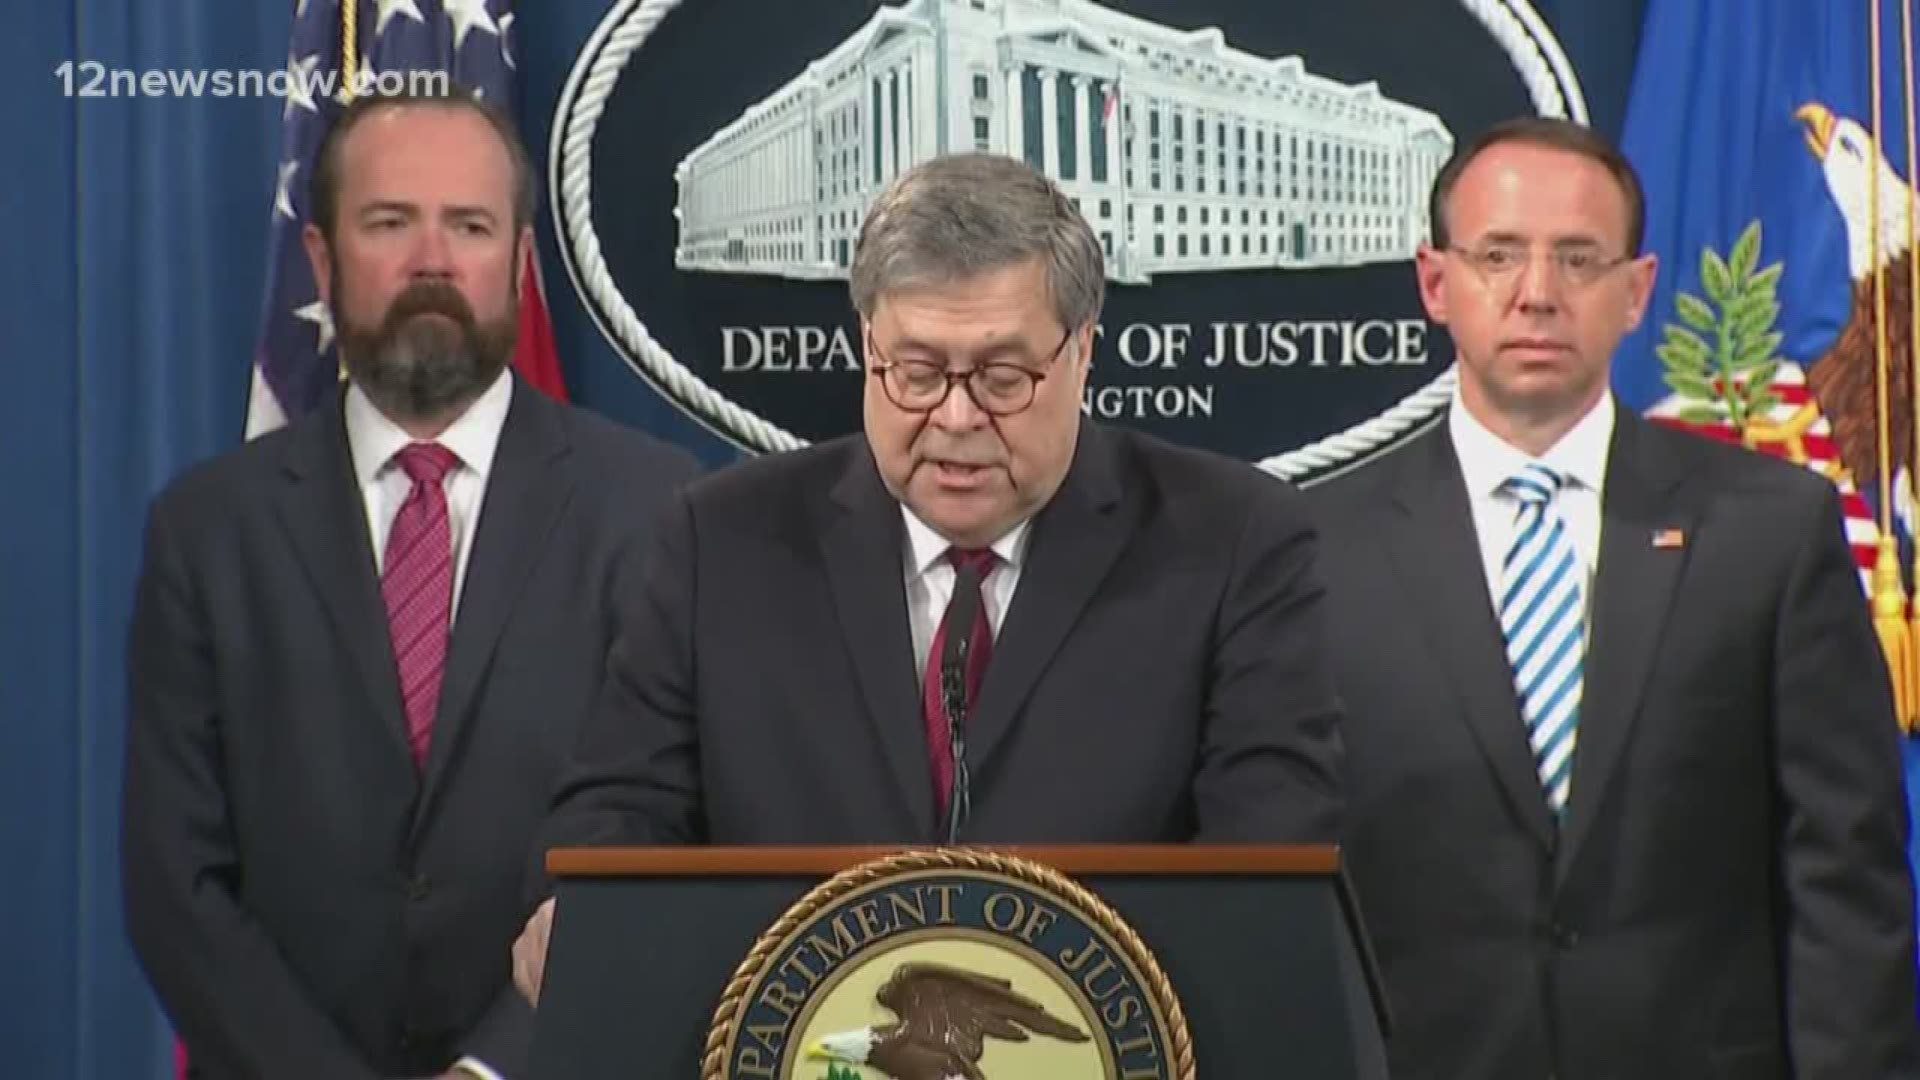 Barr says he's prepared to deal with ramifications from President Trump